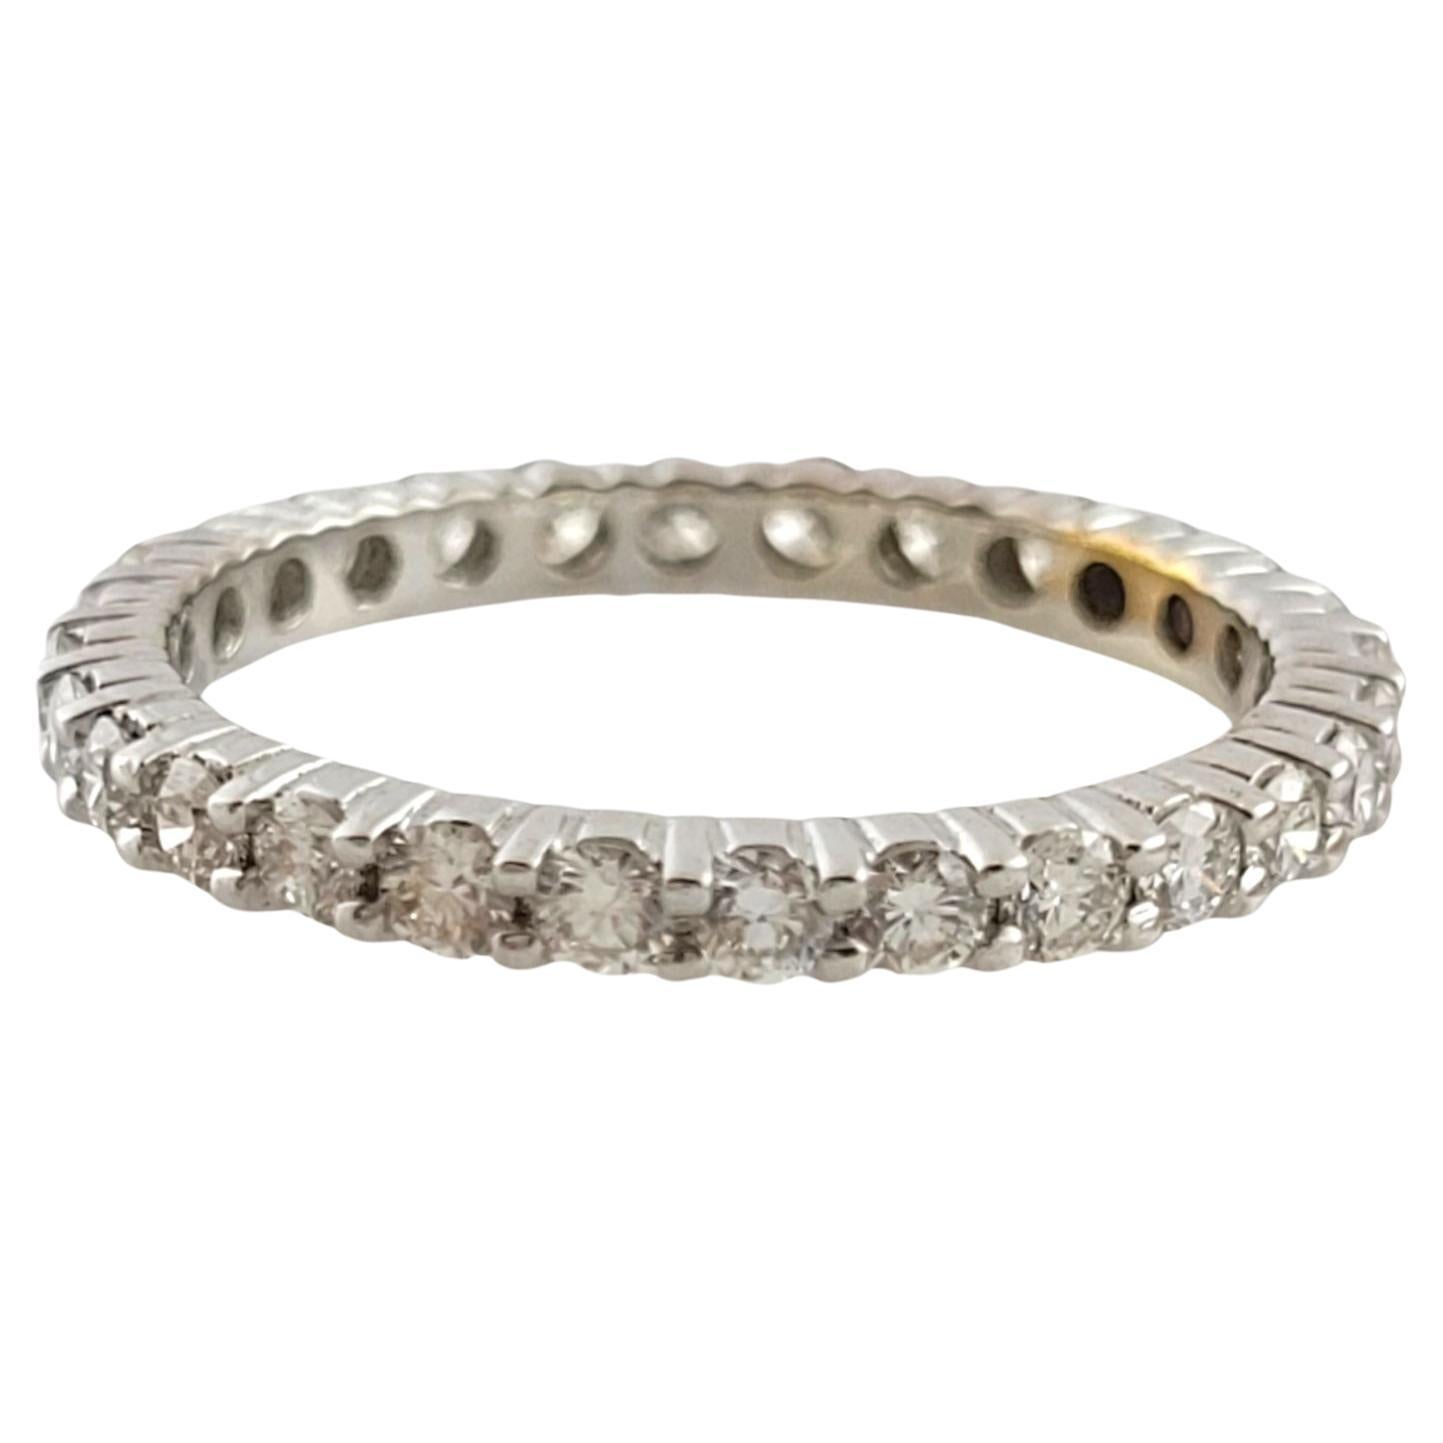 Beautiful 14K white gold eternity band with 28 round cut, sparkling diamonds!

Approximate total diamond weight: 1.00 cttw

Diamond clarity: SI1-I1

Diamond color: G-H

Ring size: 6

Shank: 2.1mm

Weight: 1.78 g/ 1.1 dwt

Tested 14K

Comes with JAGI